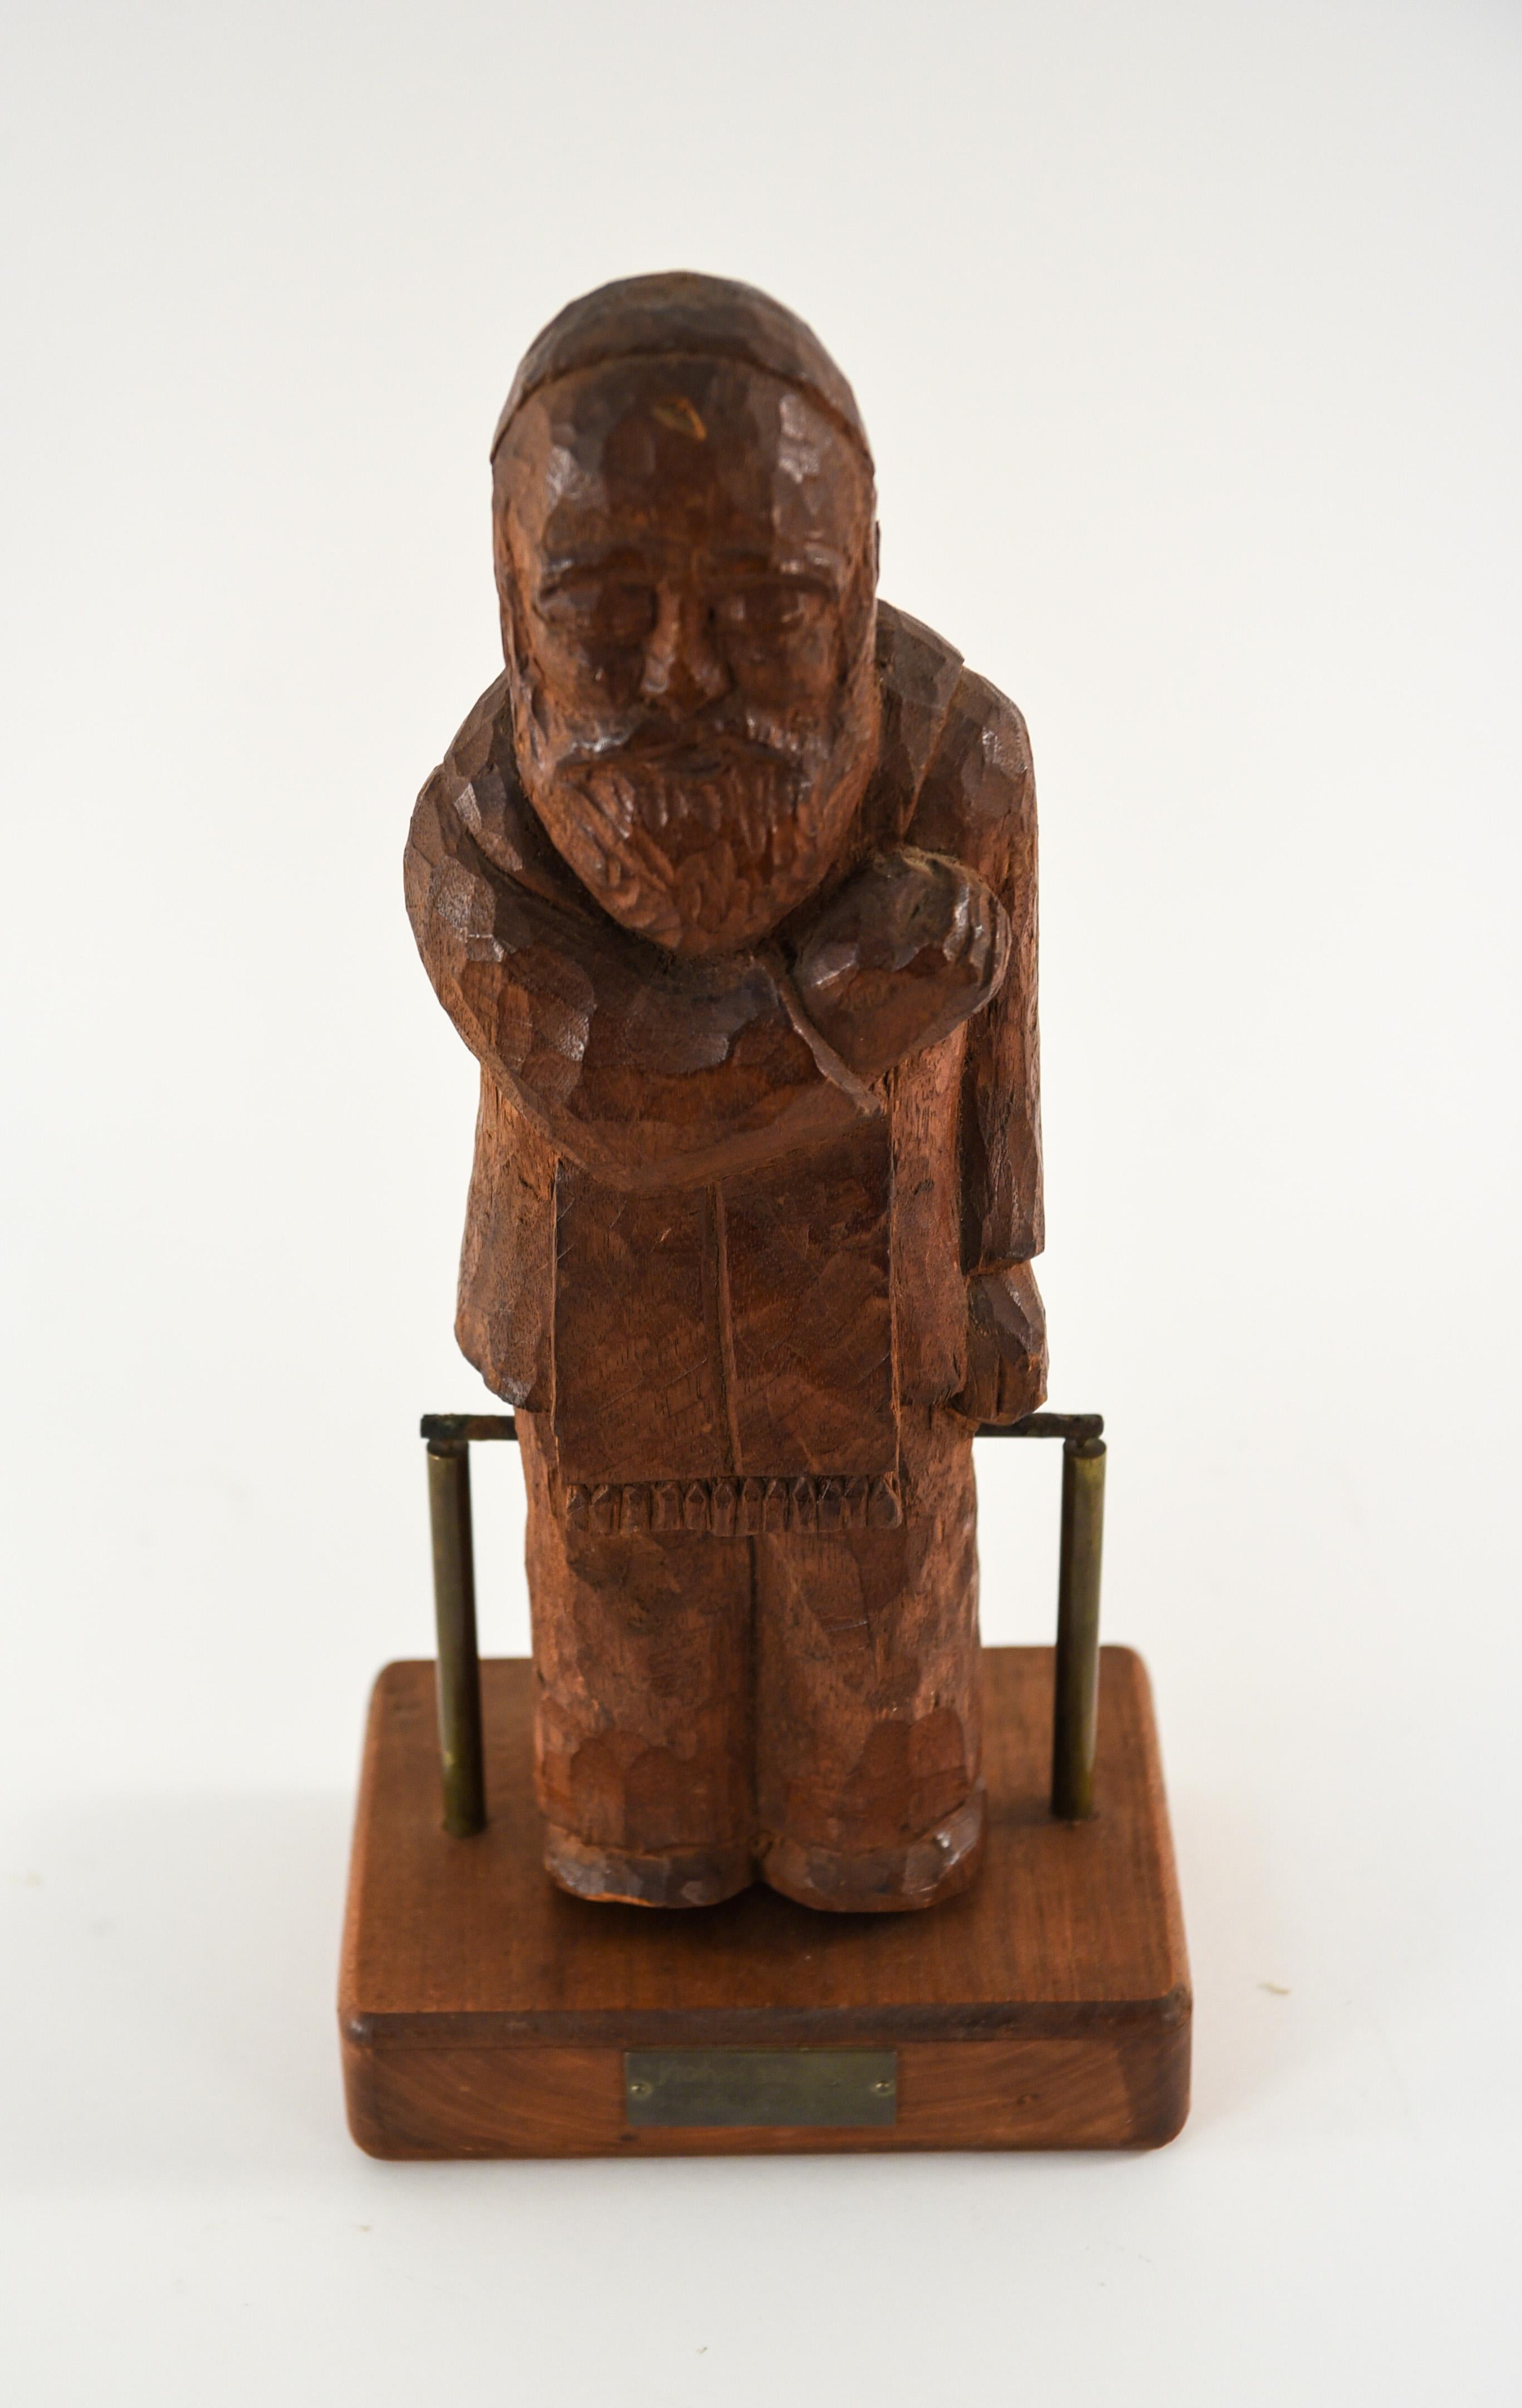 A Kinetic bobbing wooden sculpture of a Rabbi figure. With a small metal plaque adorning the front of the base.